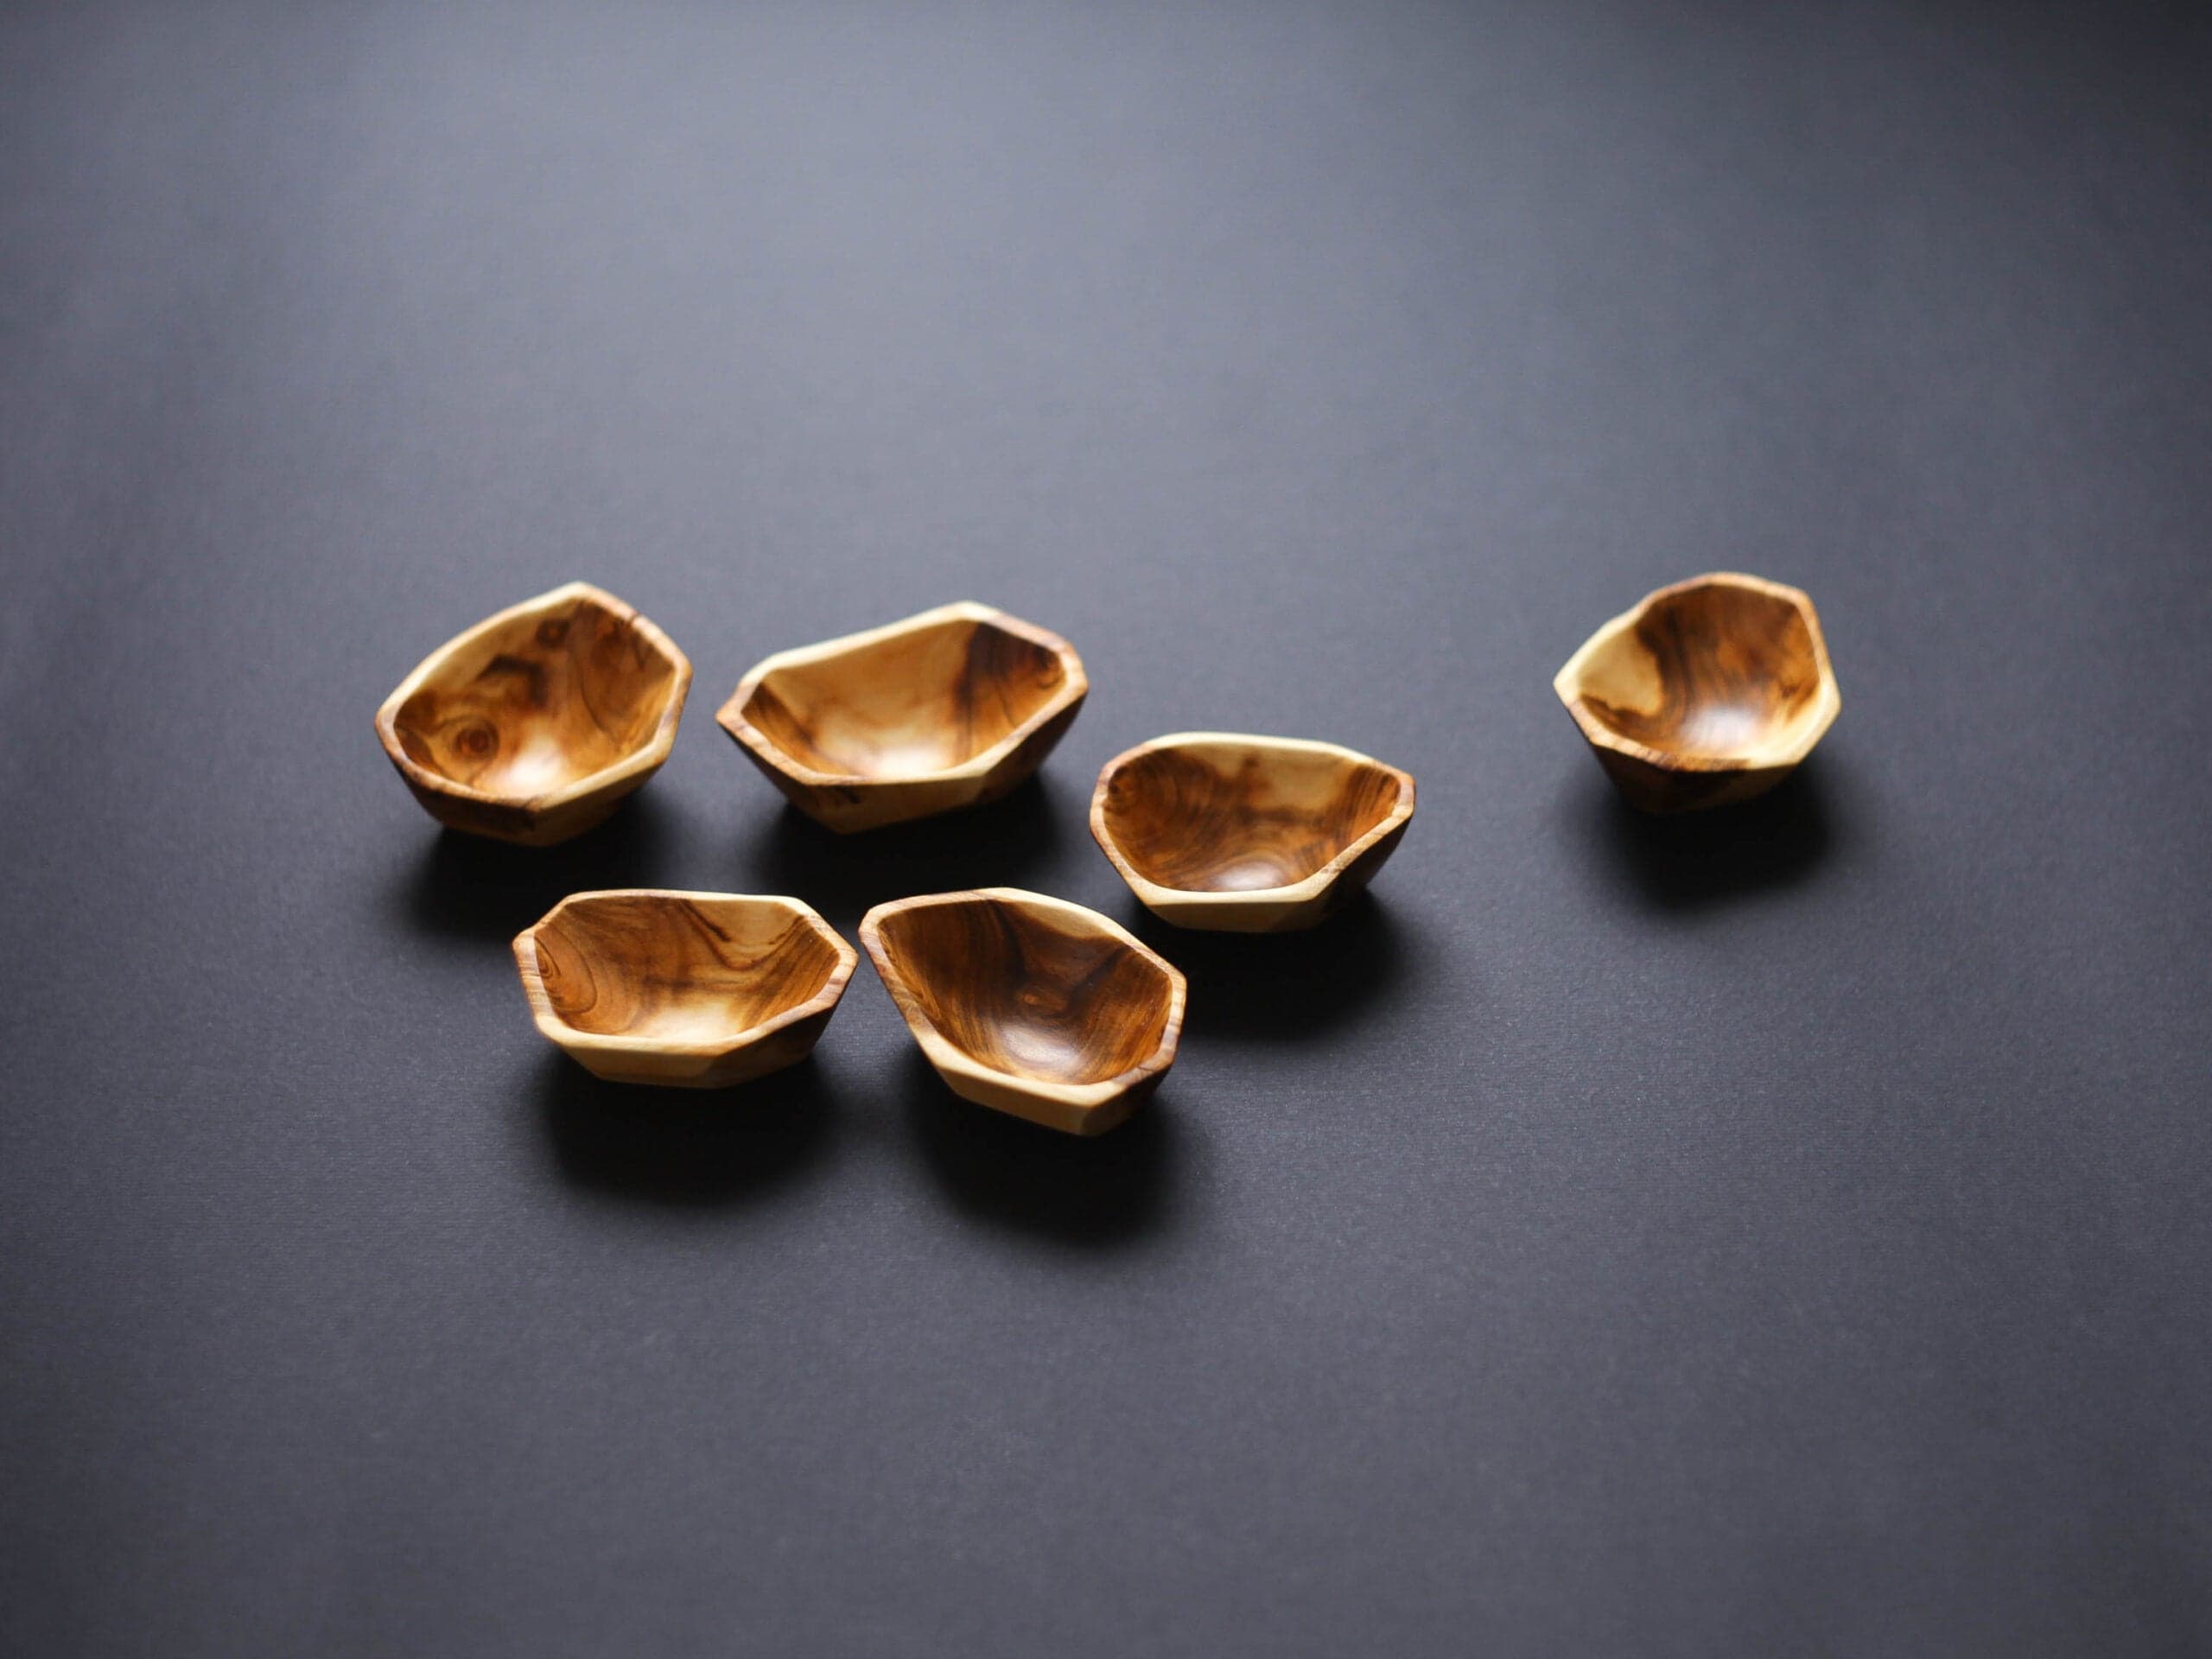 Handmade, artisan mini wooden apricot bowls for appetizers, spices, and sauces at your next dinner party.